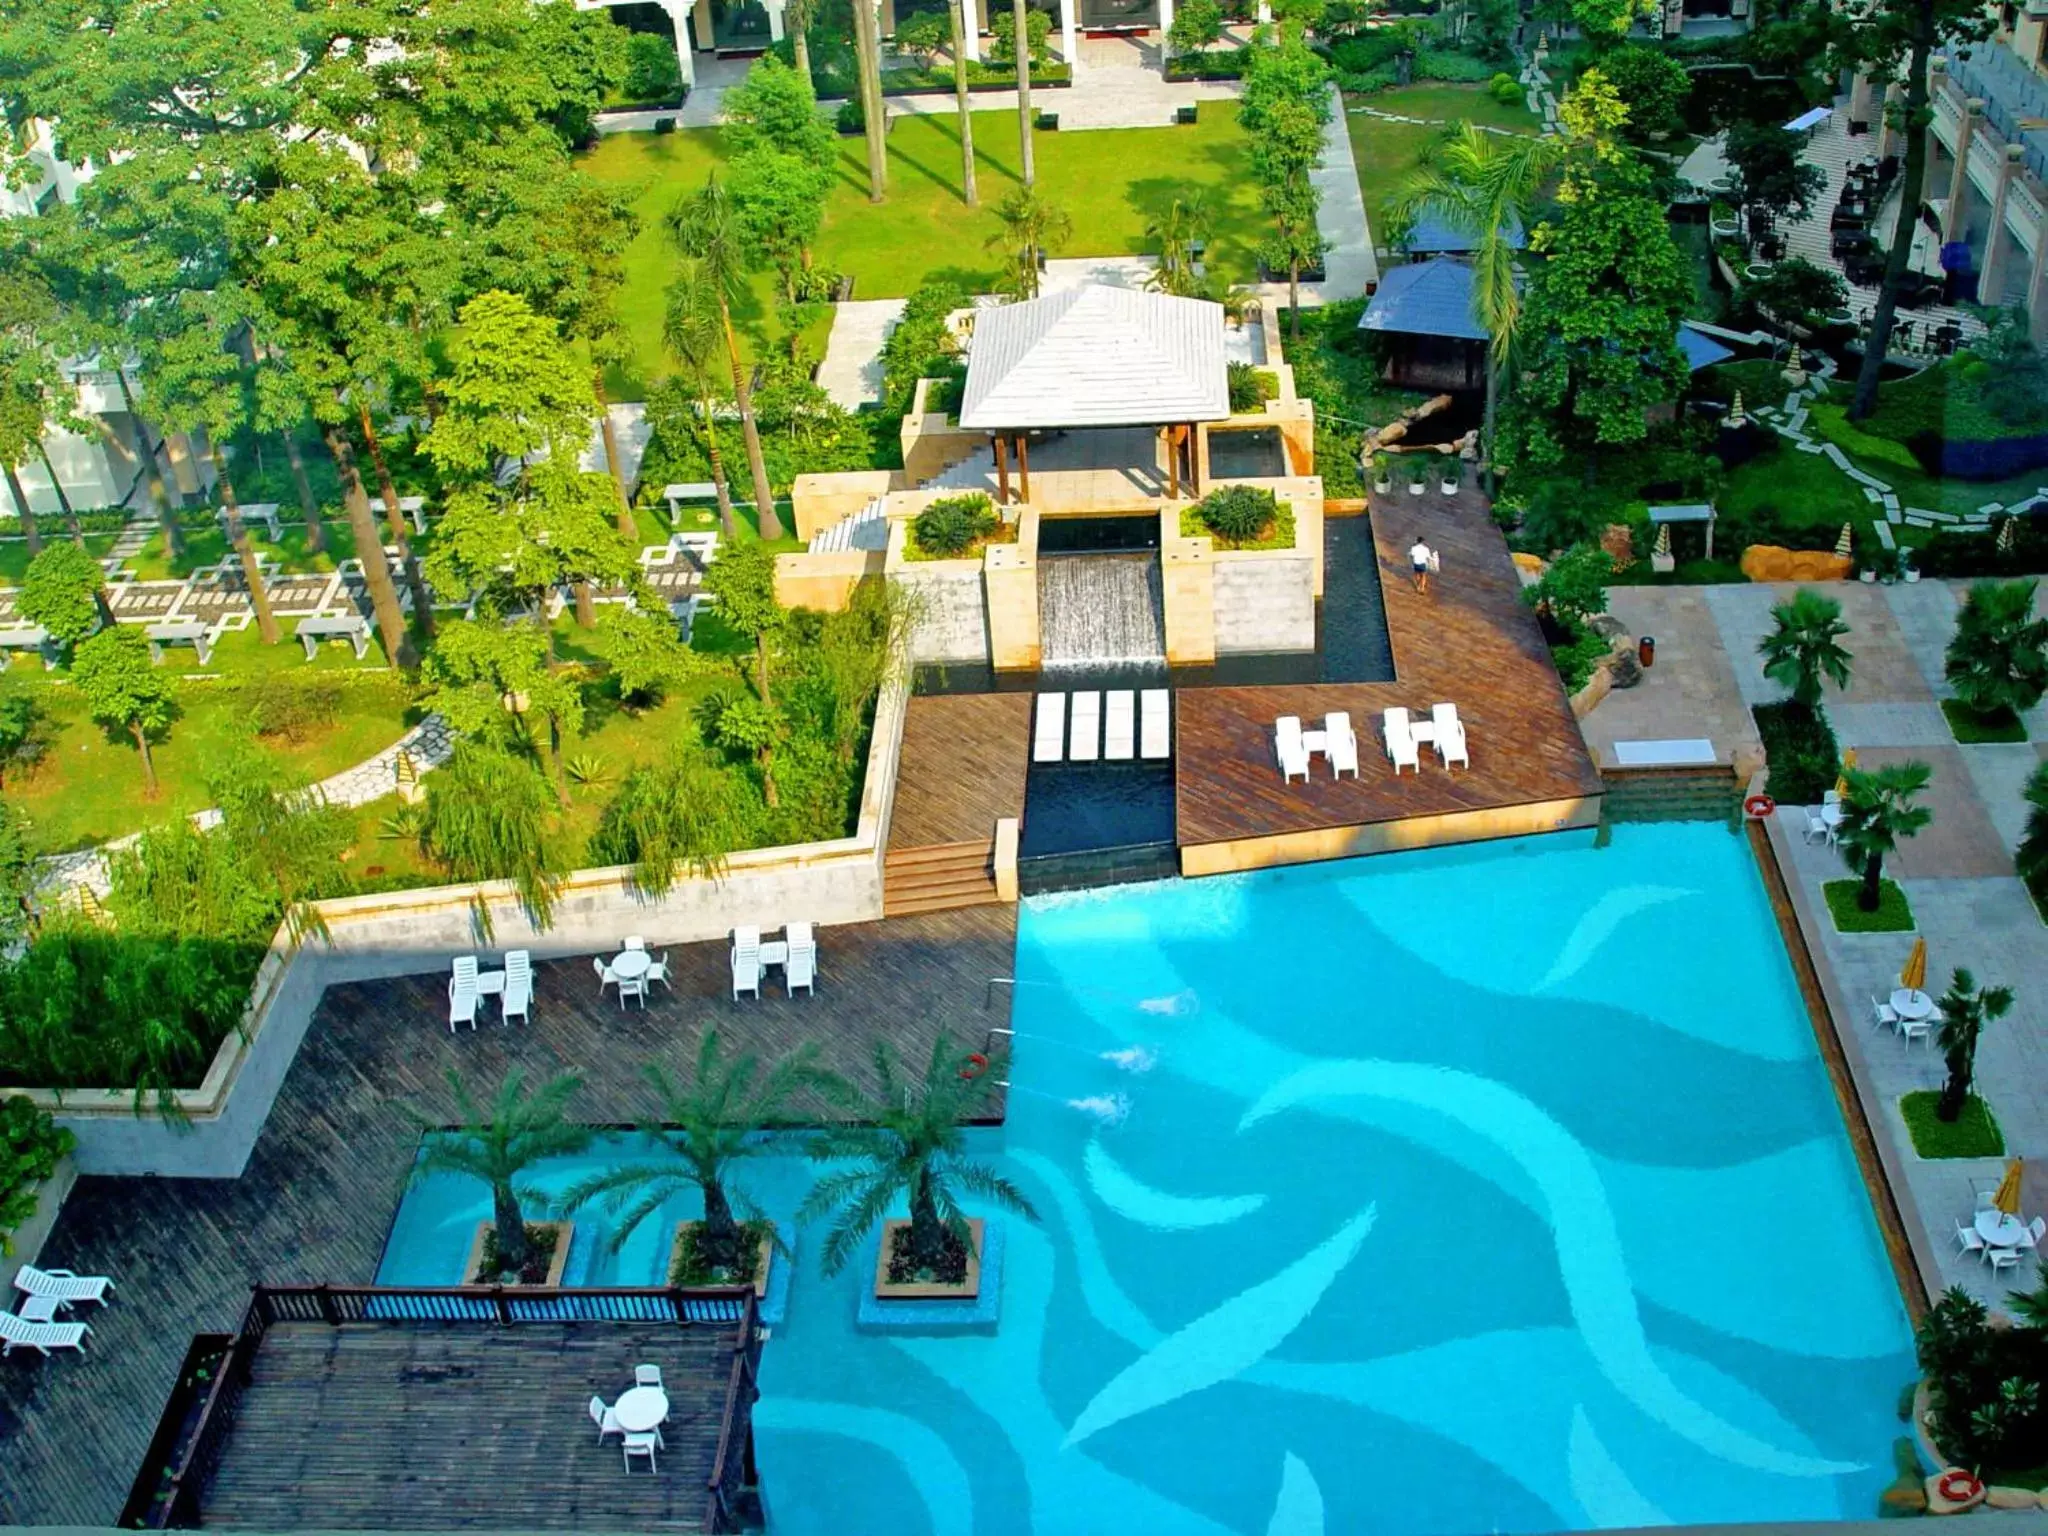 Pool View in Dong Fang Hotel Guangzhou, Canton Fair Free Shuttle Bus, Canton Fair Buyer Official Registration